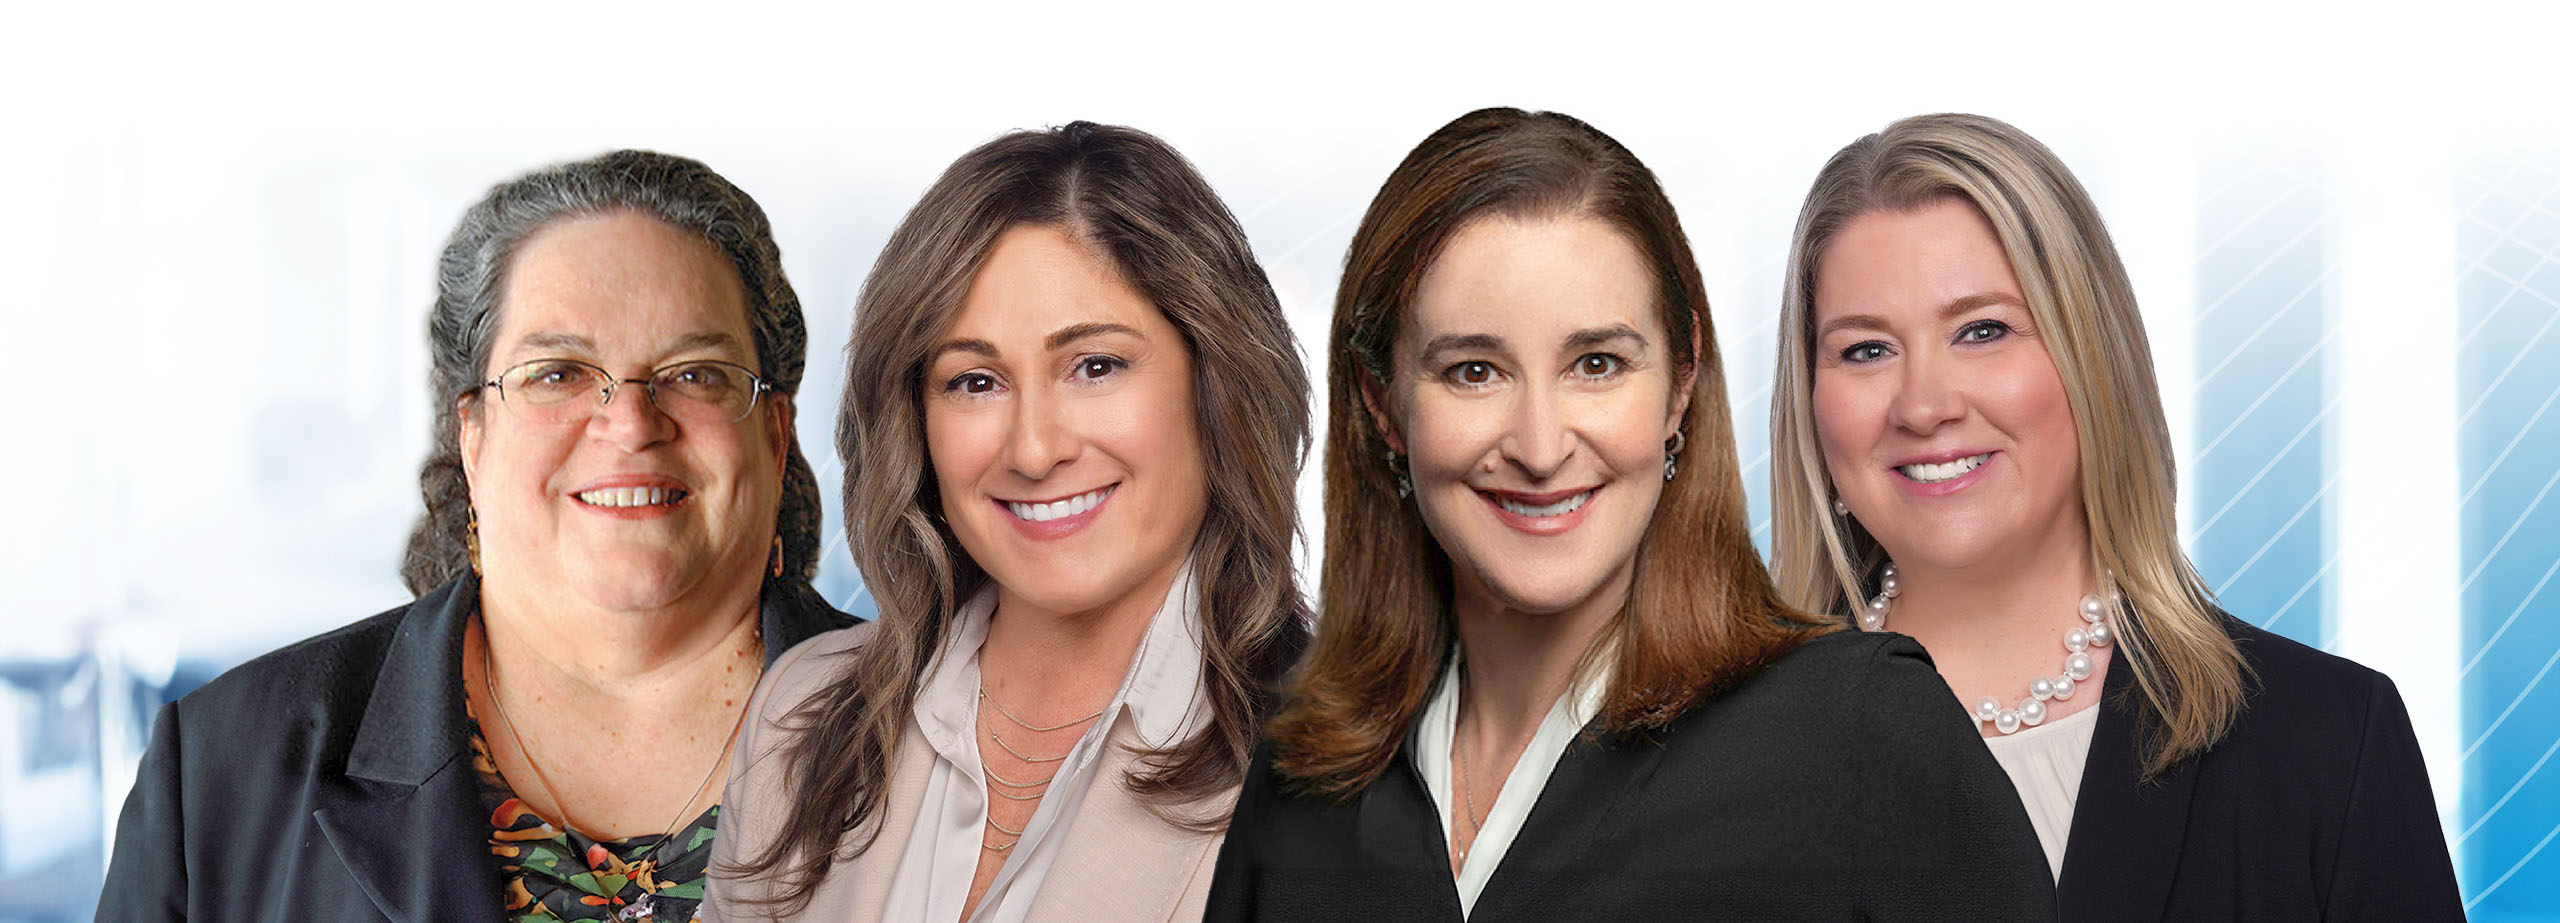 In Celebration of Women’s History Month, Finopotamus Recognized Samaha & Associates’ Disa D’Andrea, Tracy Helm, Janeace Liles and Olivia Reynolds